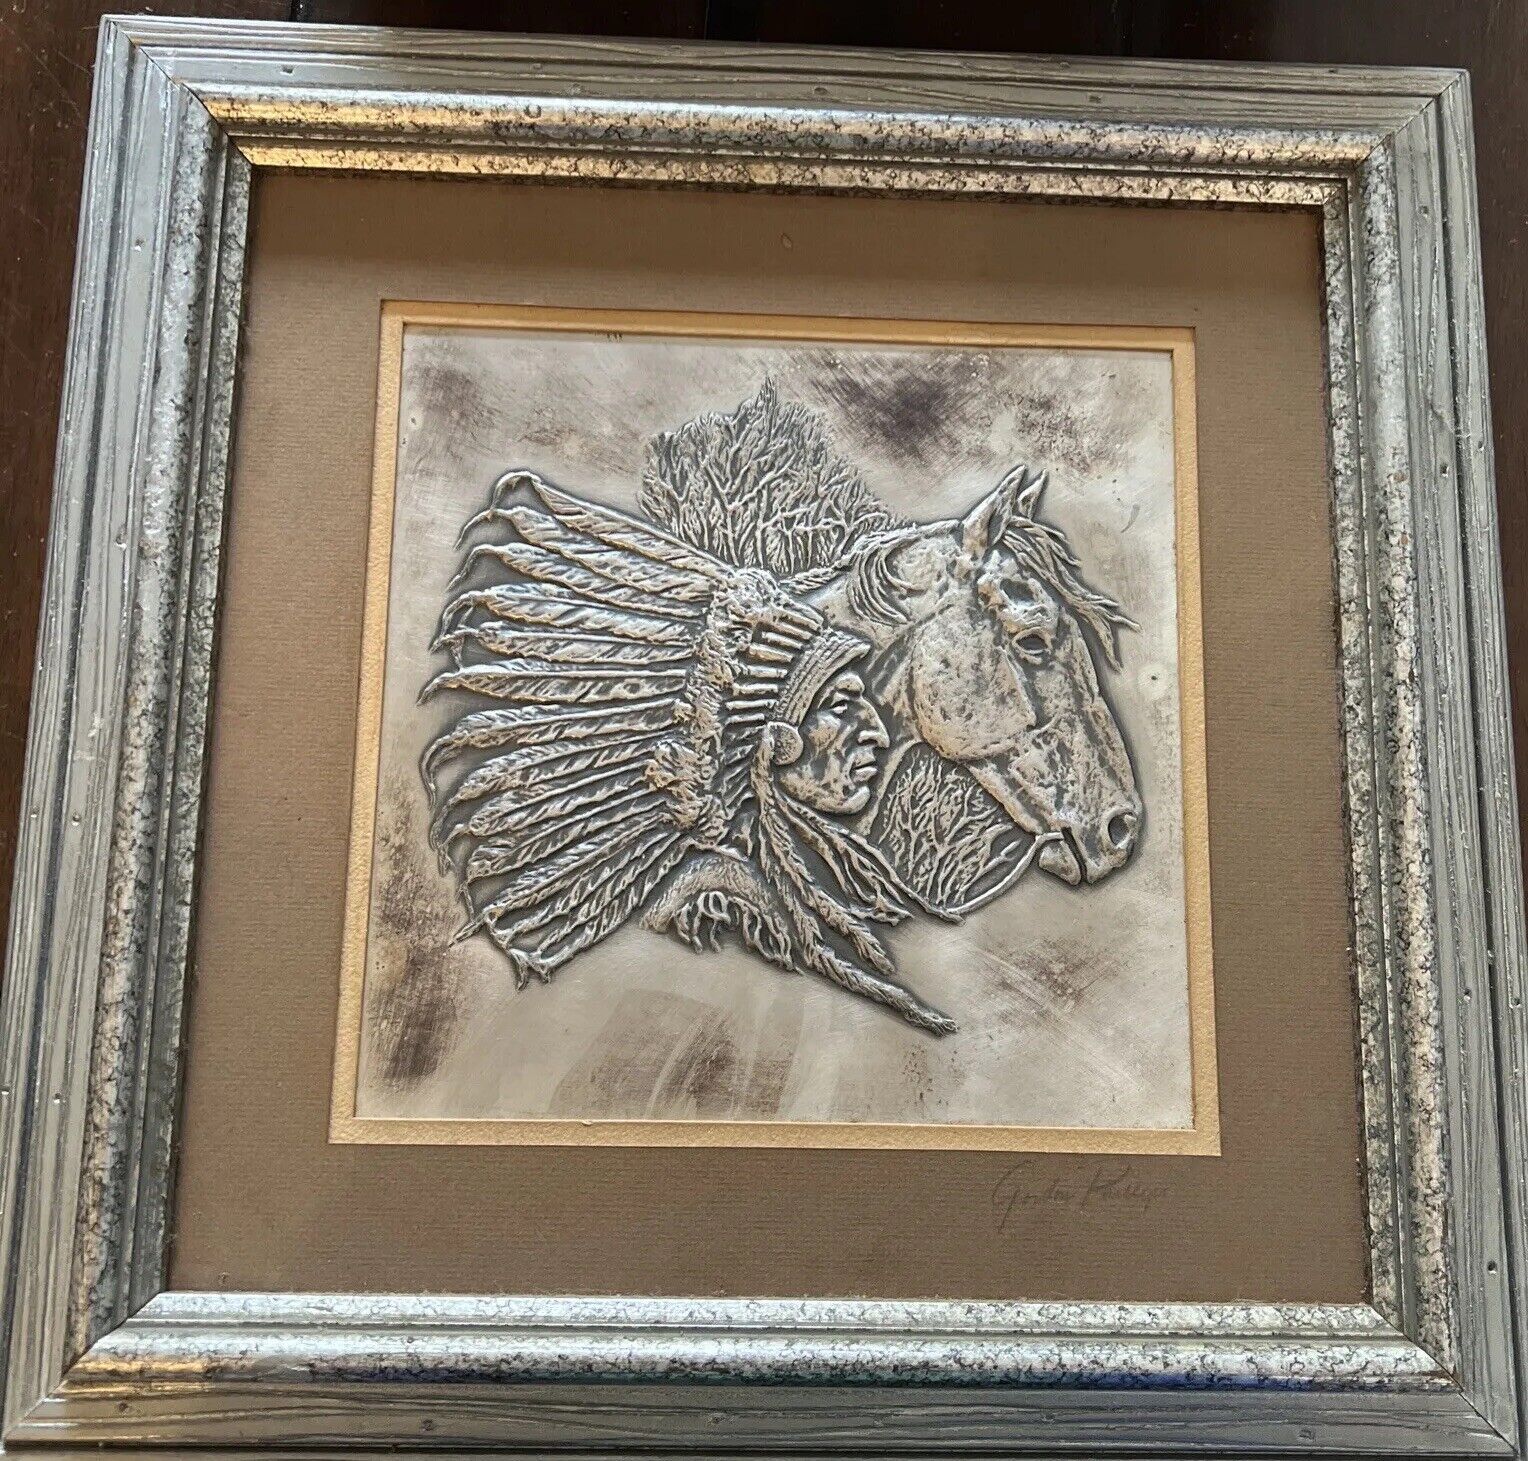 Gordon Phillips Western Silver Relief Wall Art Sculpture, From “The Westerners “